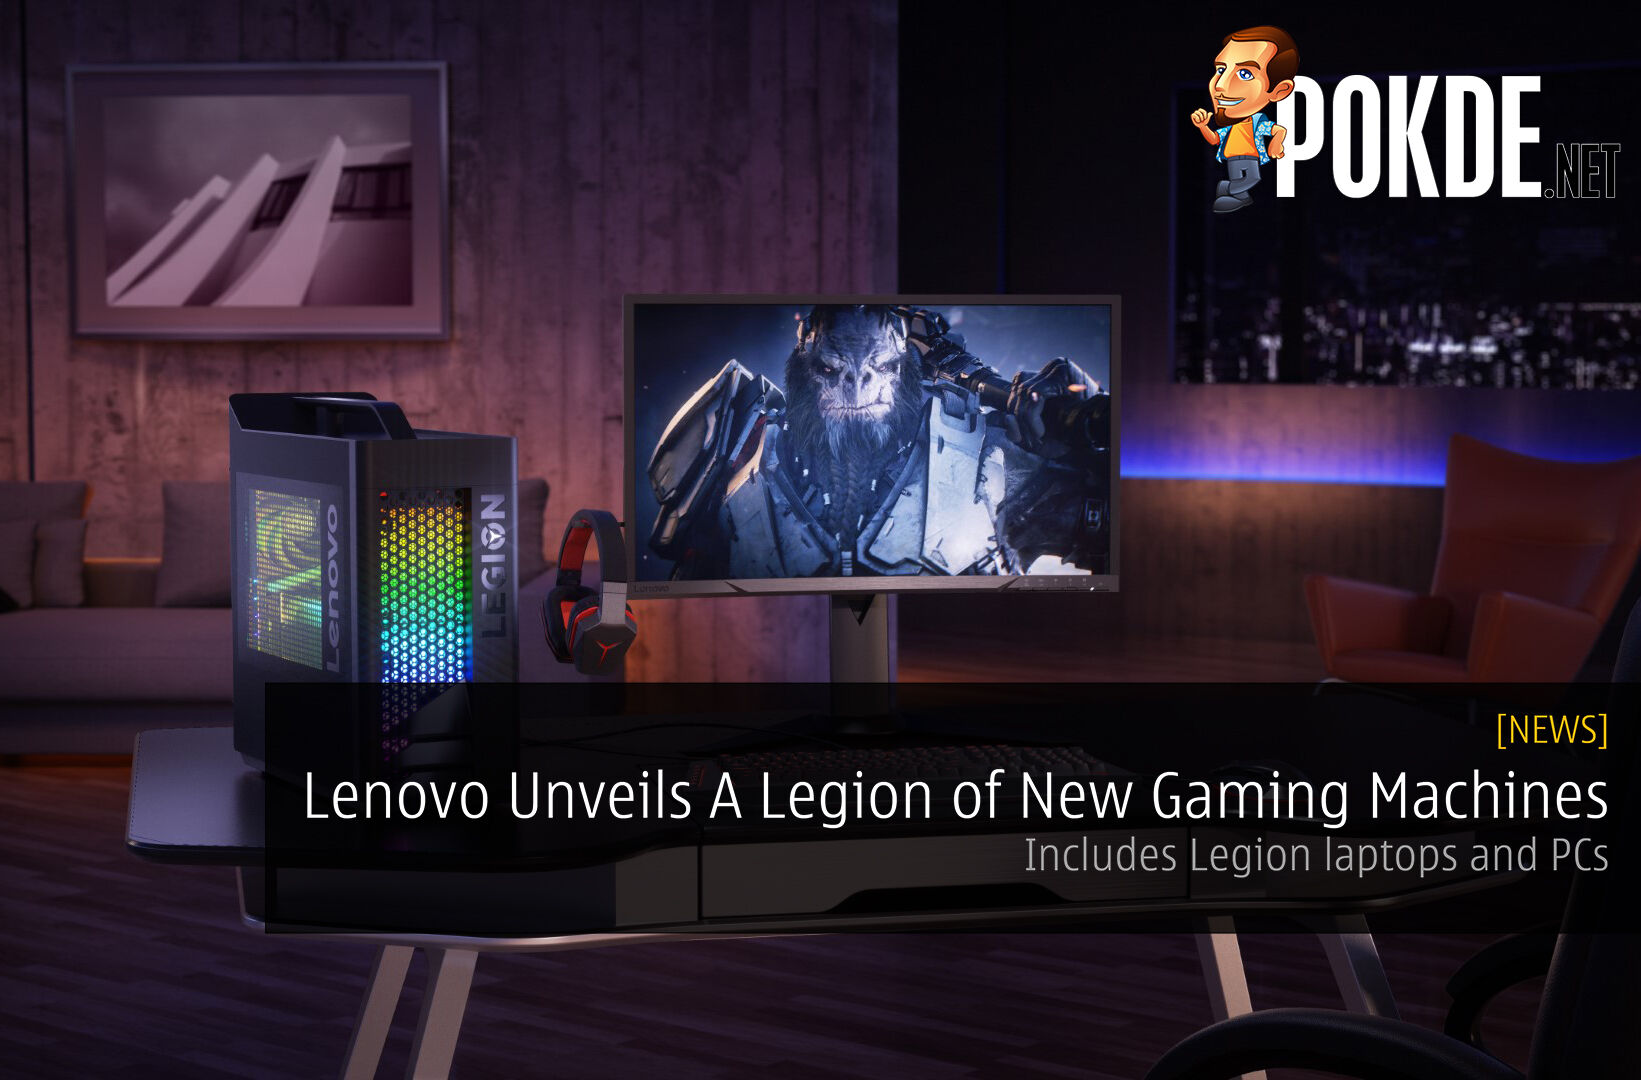 Lenovo Unveils A Legion of New Gaming Machines - Includes Legion laptops and PCs 31